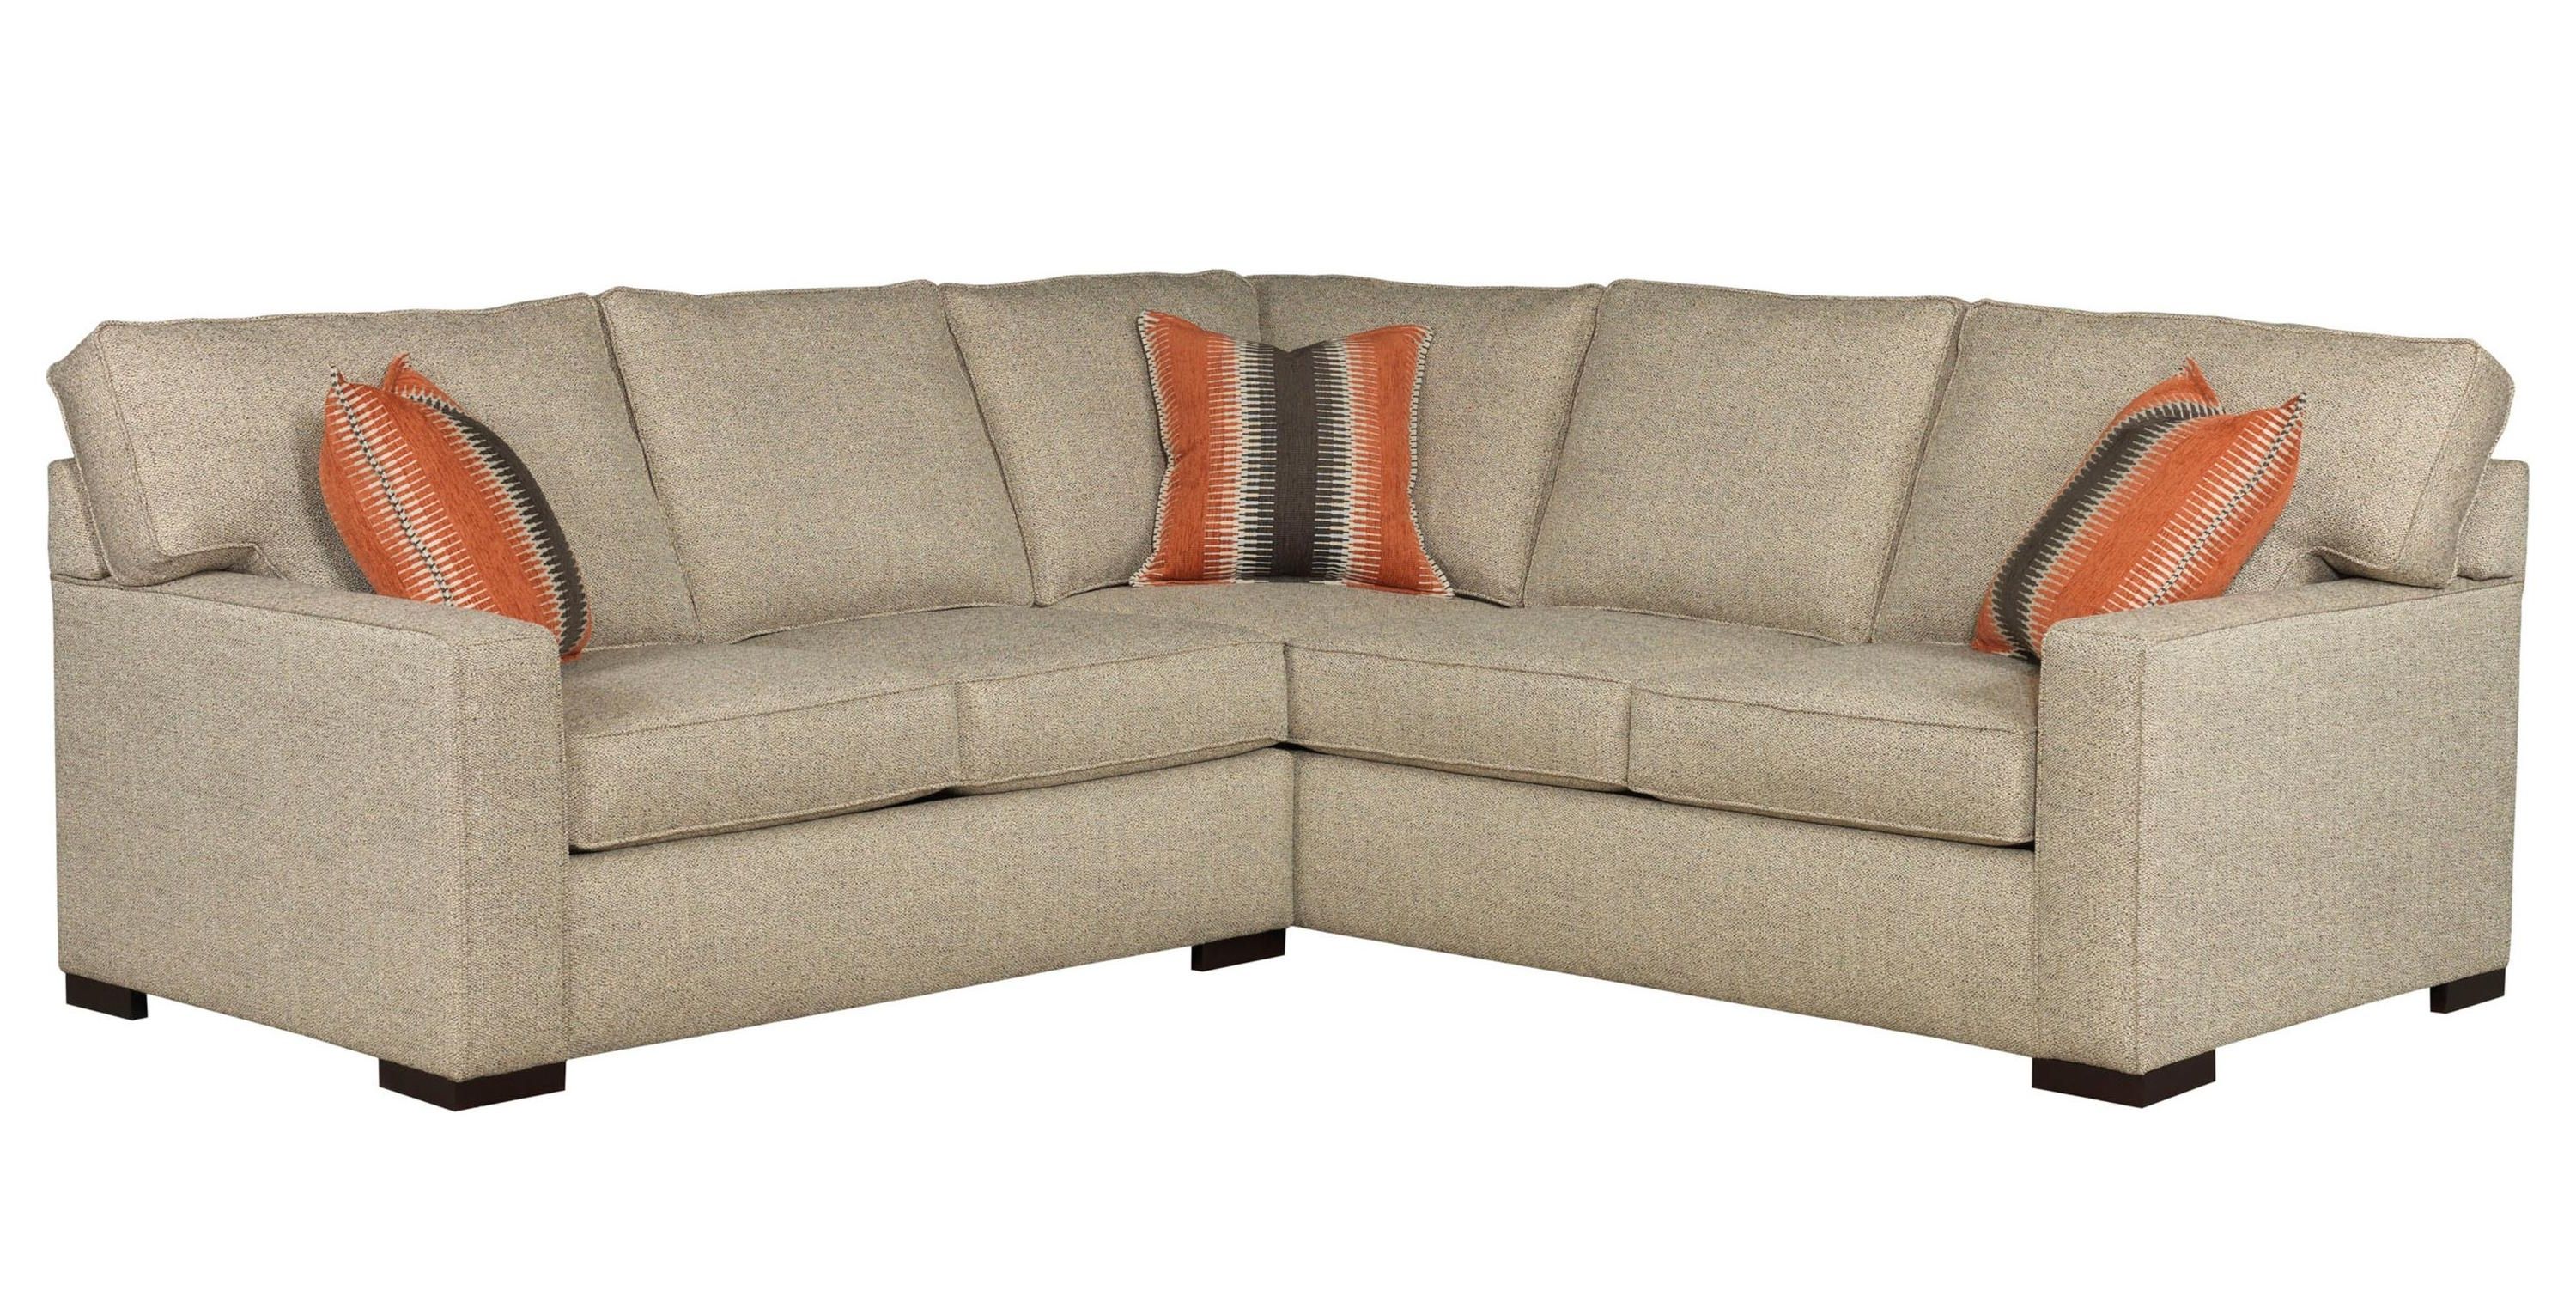 Broyhill Furniture Raphael Contemporary Two Piece Sectional Sofa Throughout Well Known Panama City Fl Sectional Sofas (View 14 of 15)